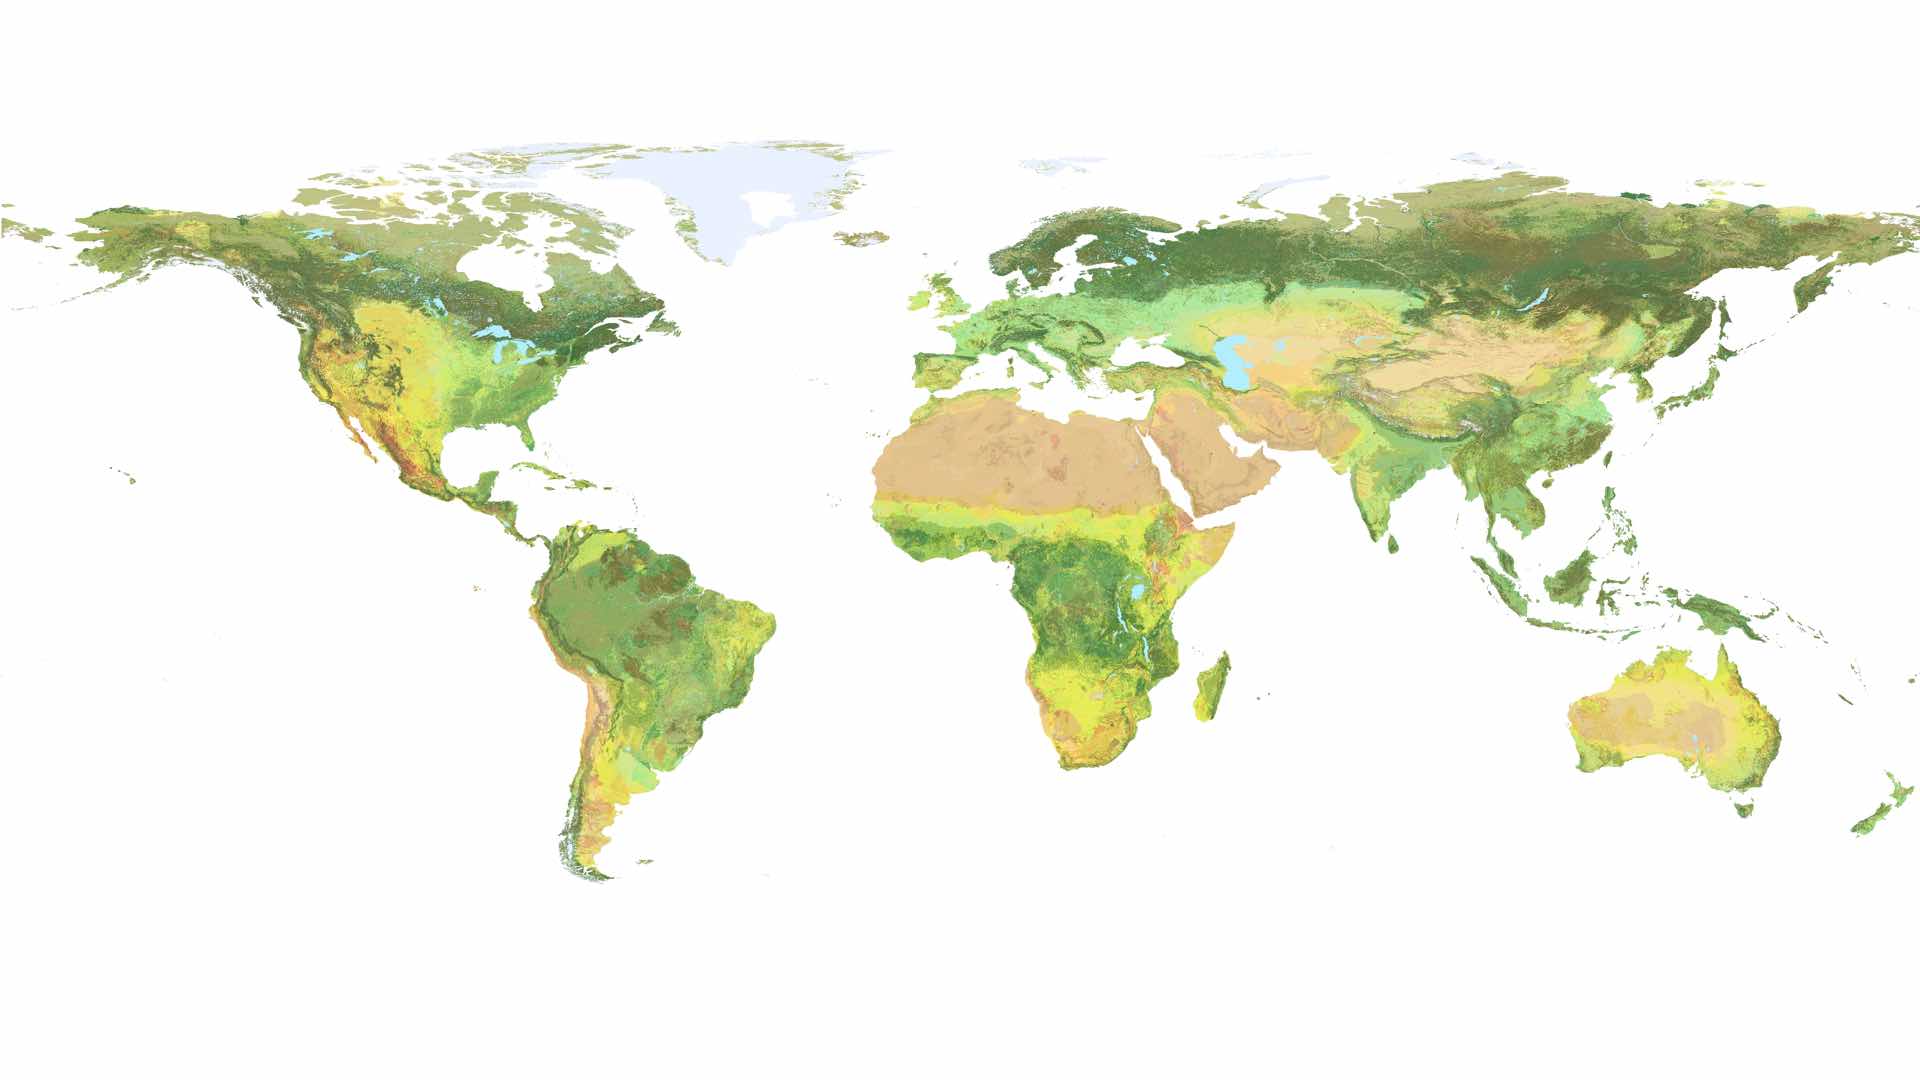 The Use of GIS to Map and Assess Ecosystem Services